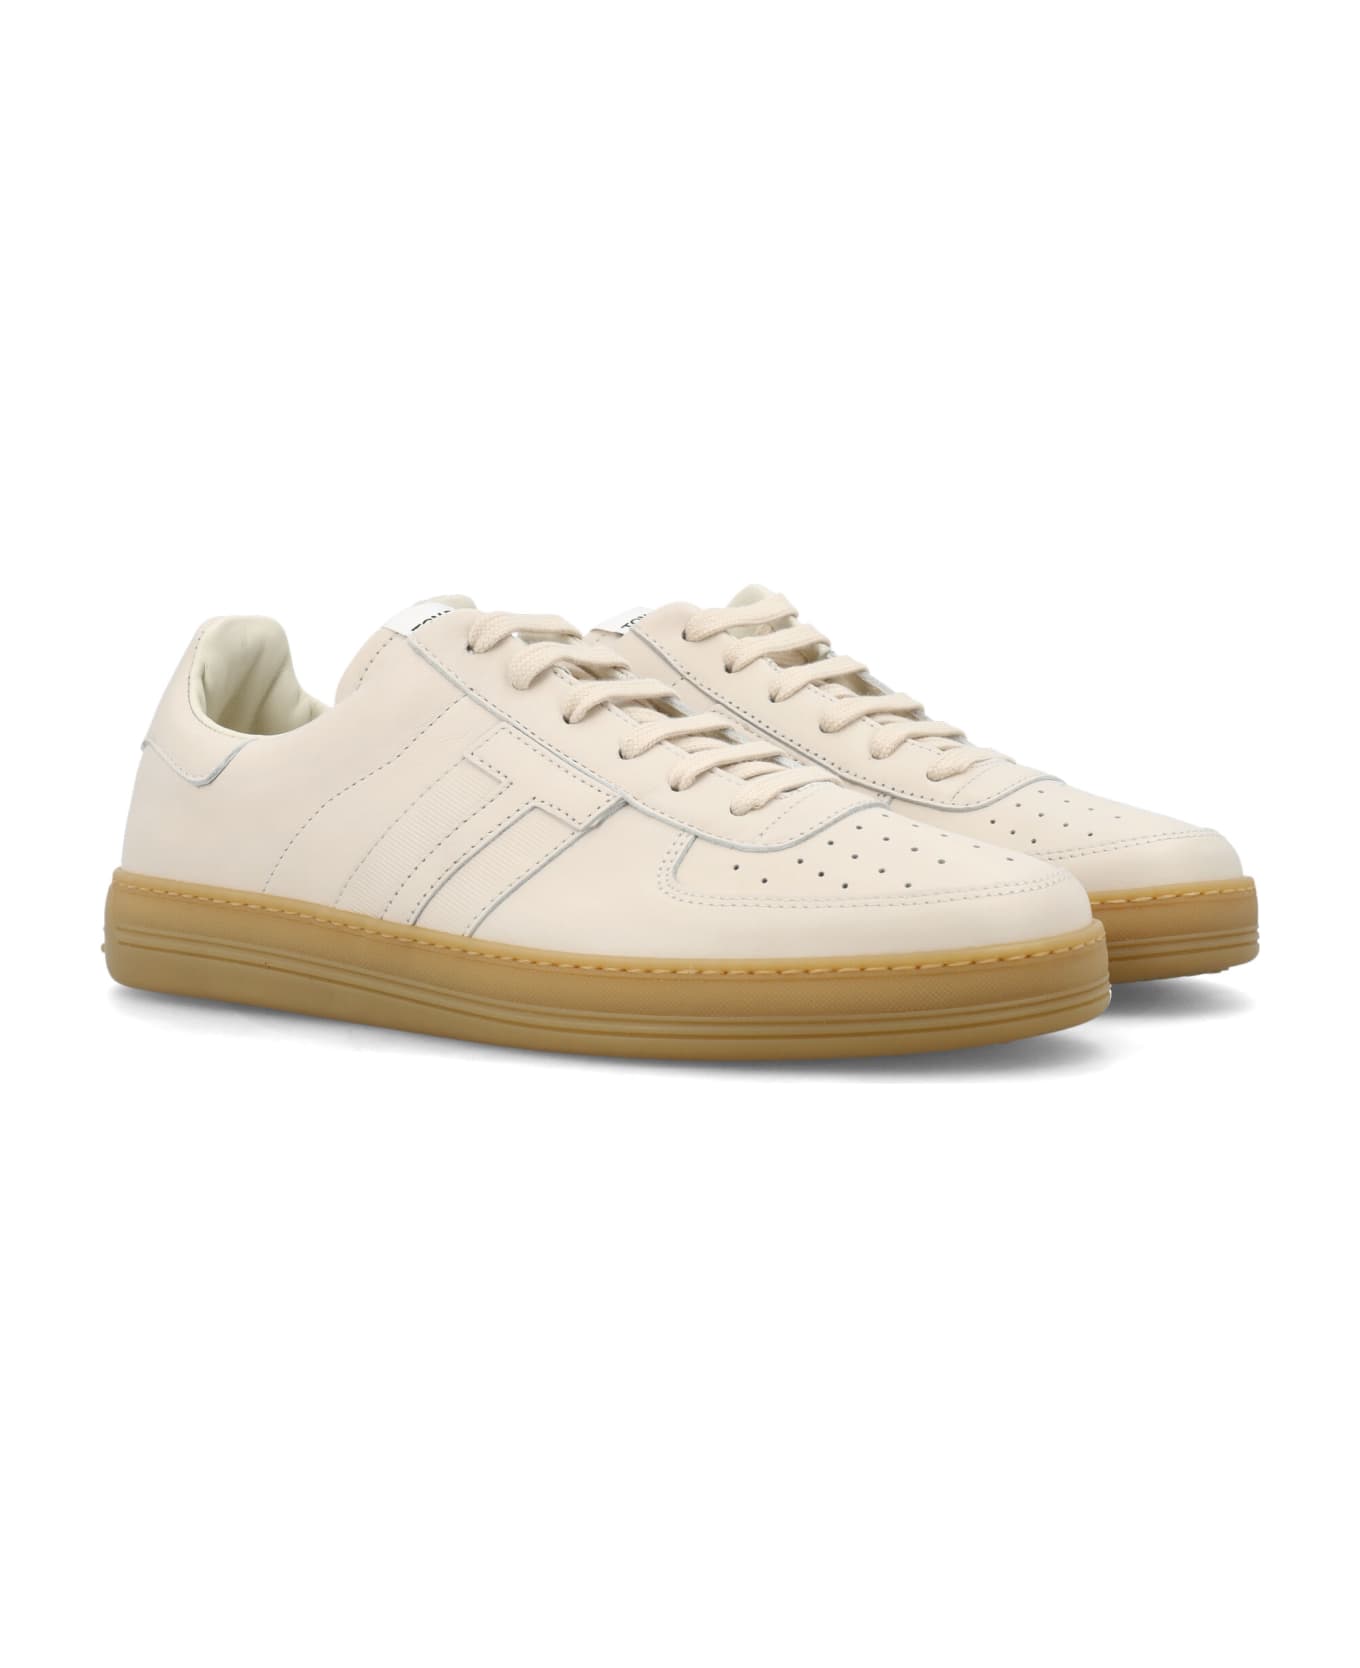 Tom Ford Radcliffe Sneakers - Cream スニーカー